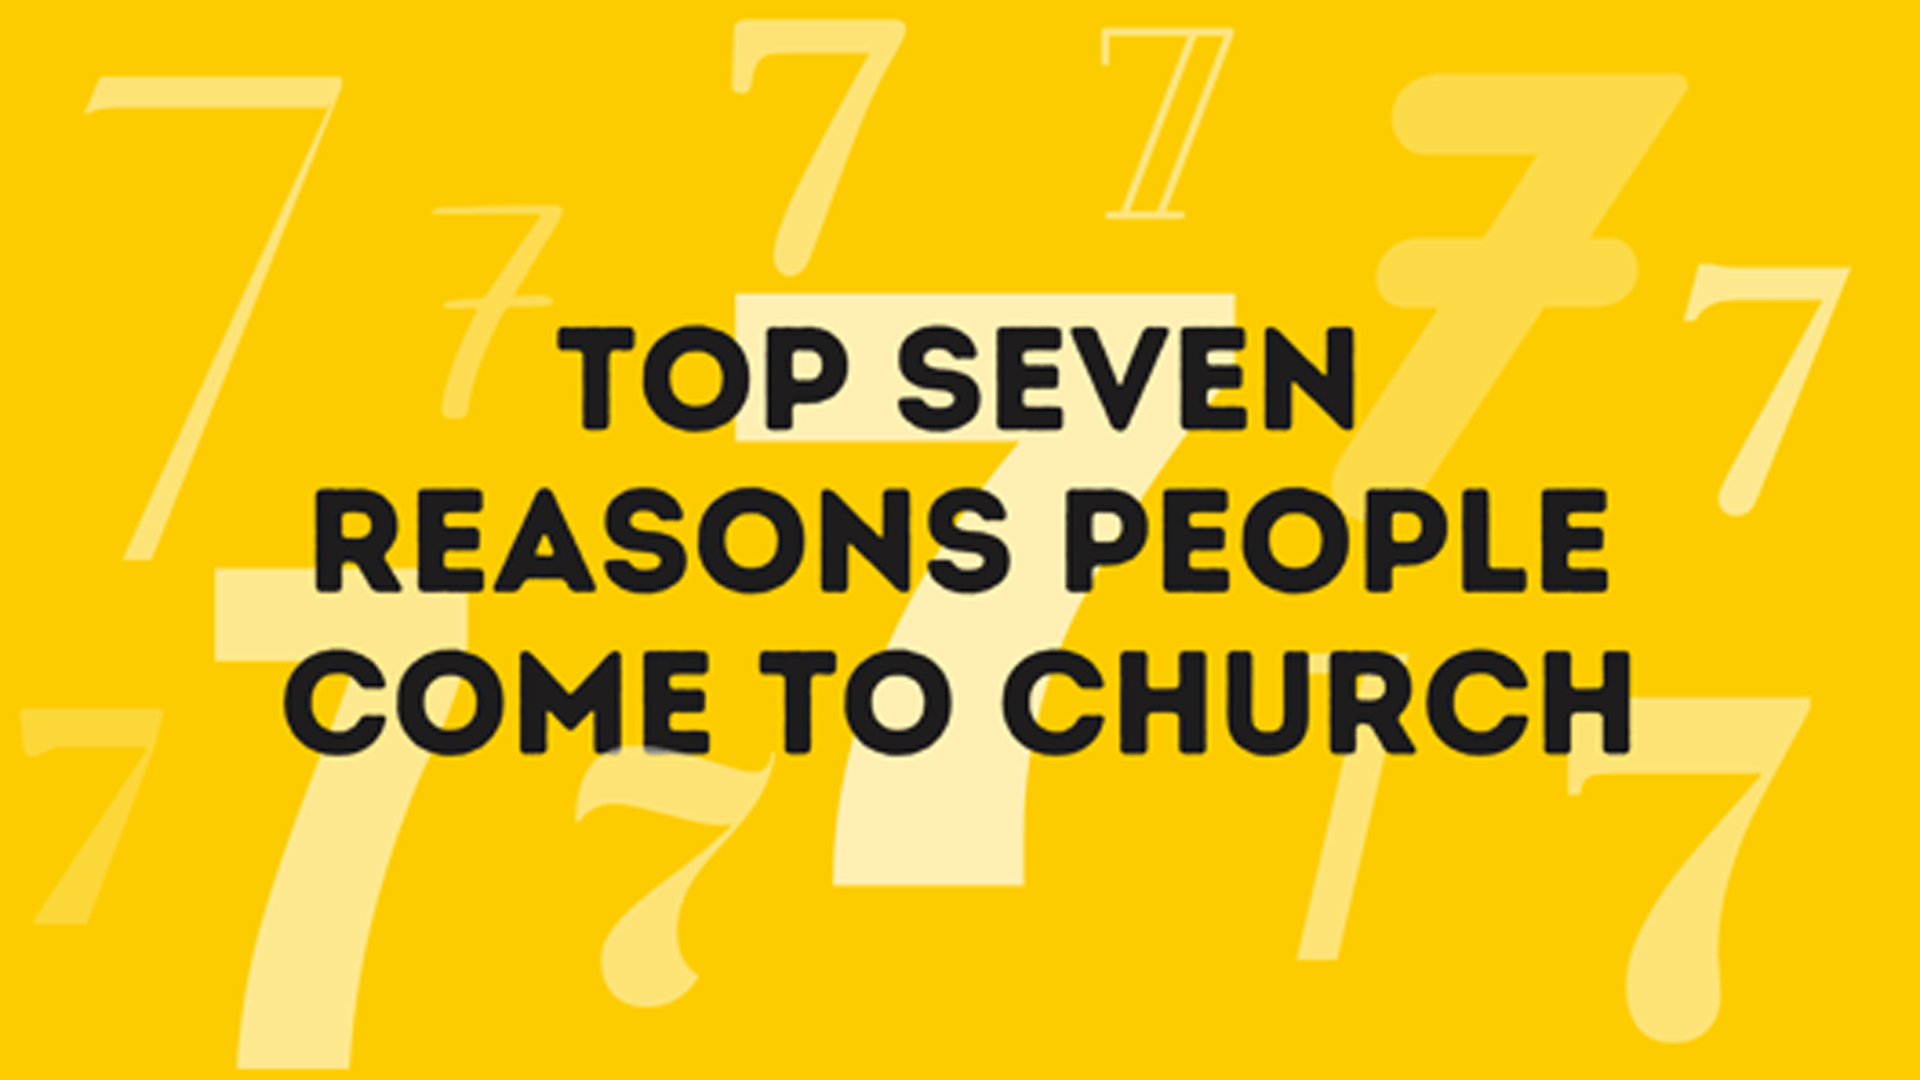 Top seven reasons people come to church